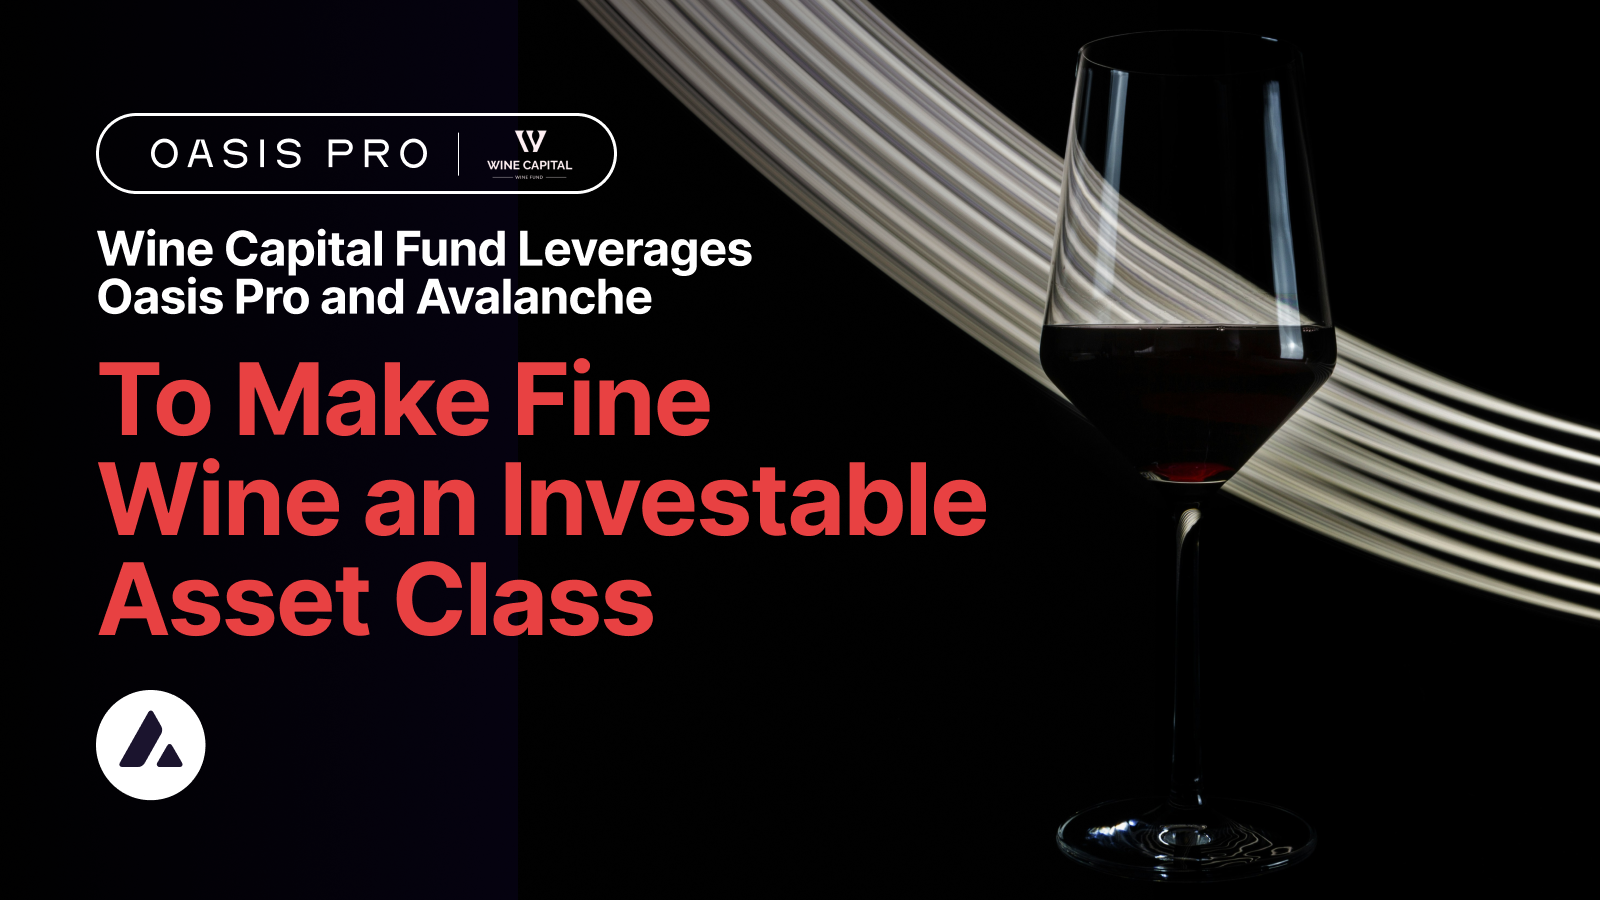 Wine Capital Fund Leverages Oasis Pro and Avalanche to Make Fine Wine an Investable Asset Class